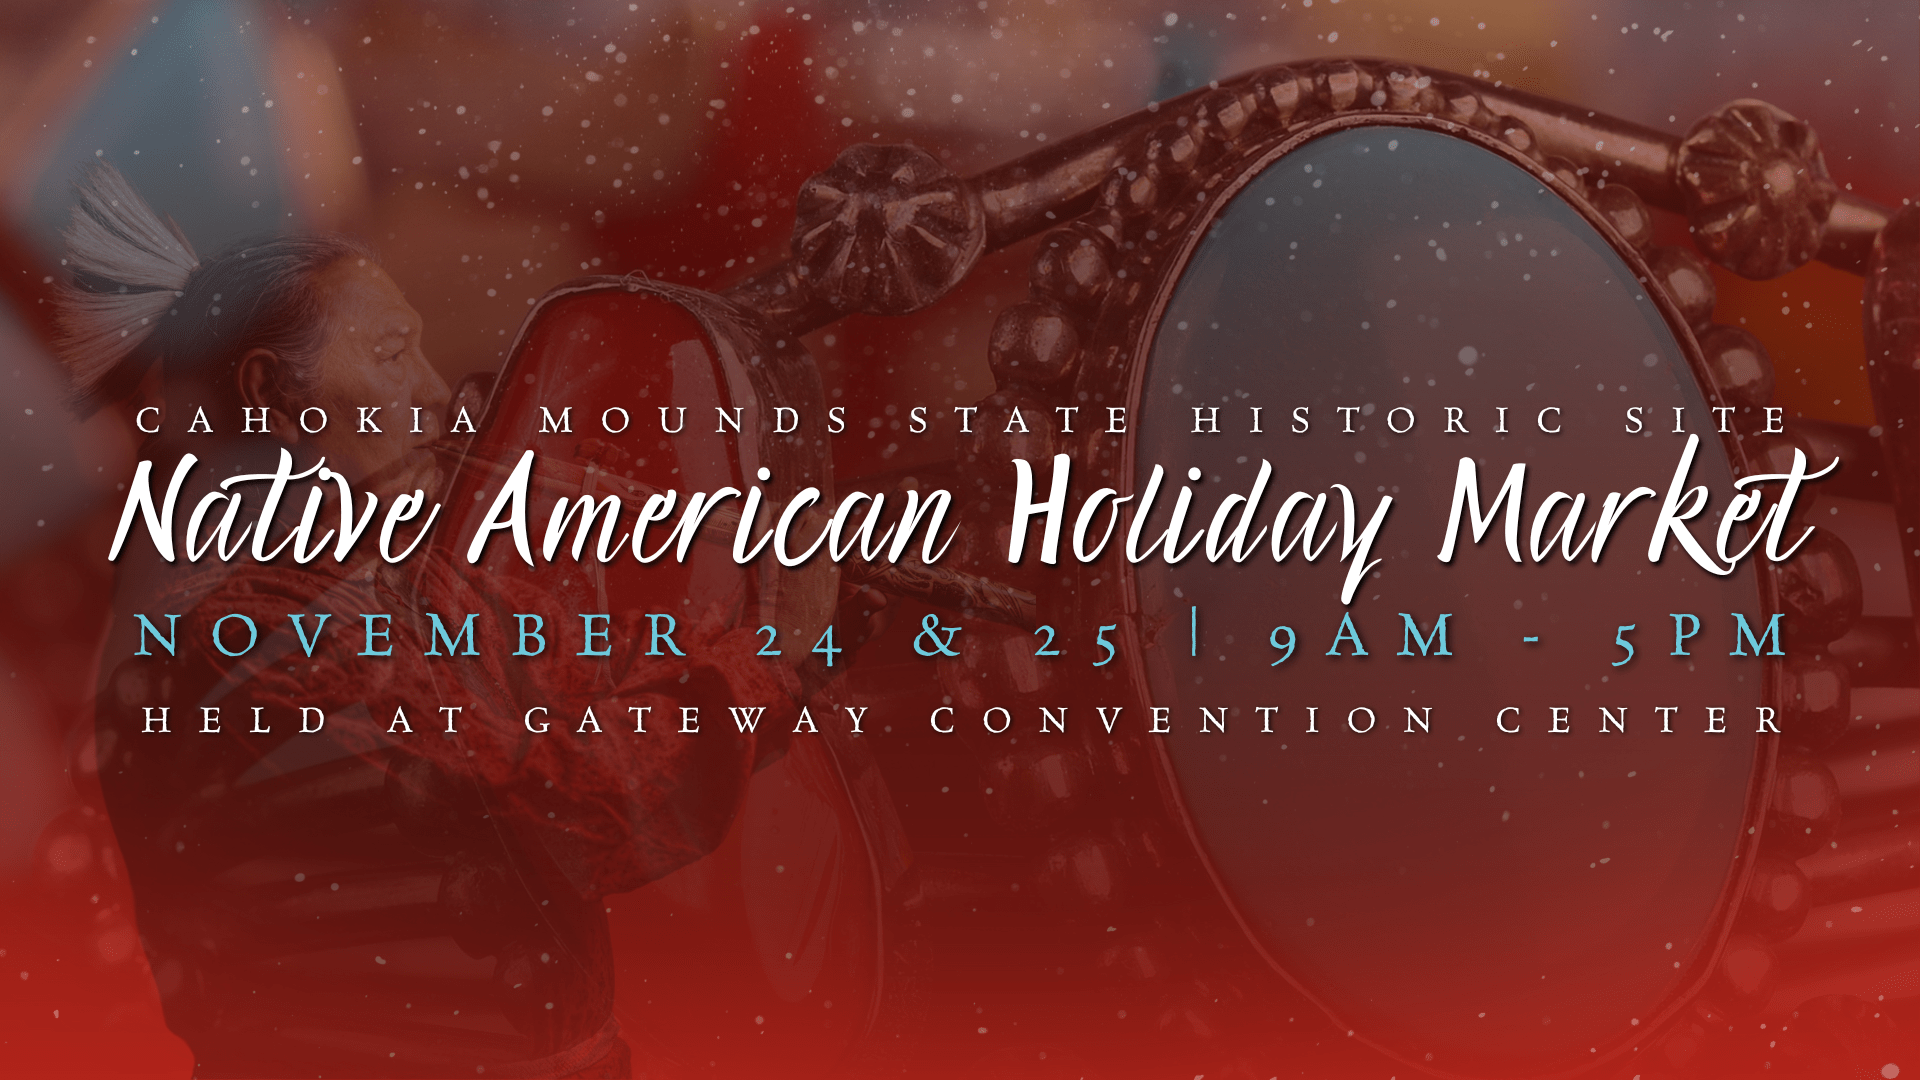 Annual Native American Holiday Market